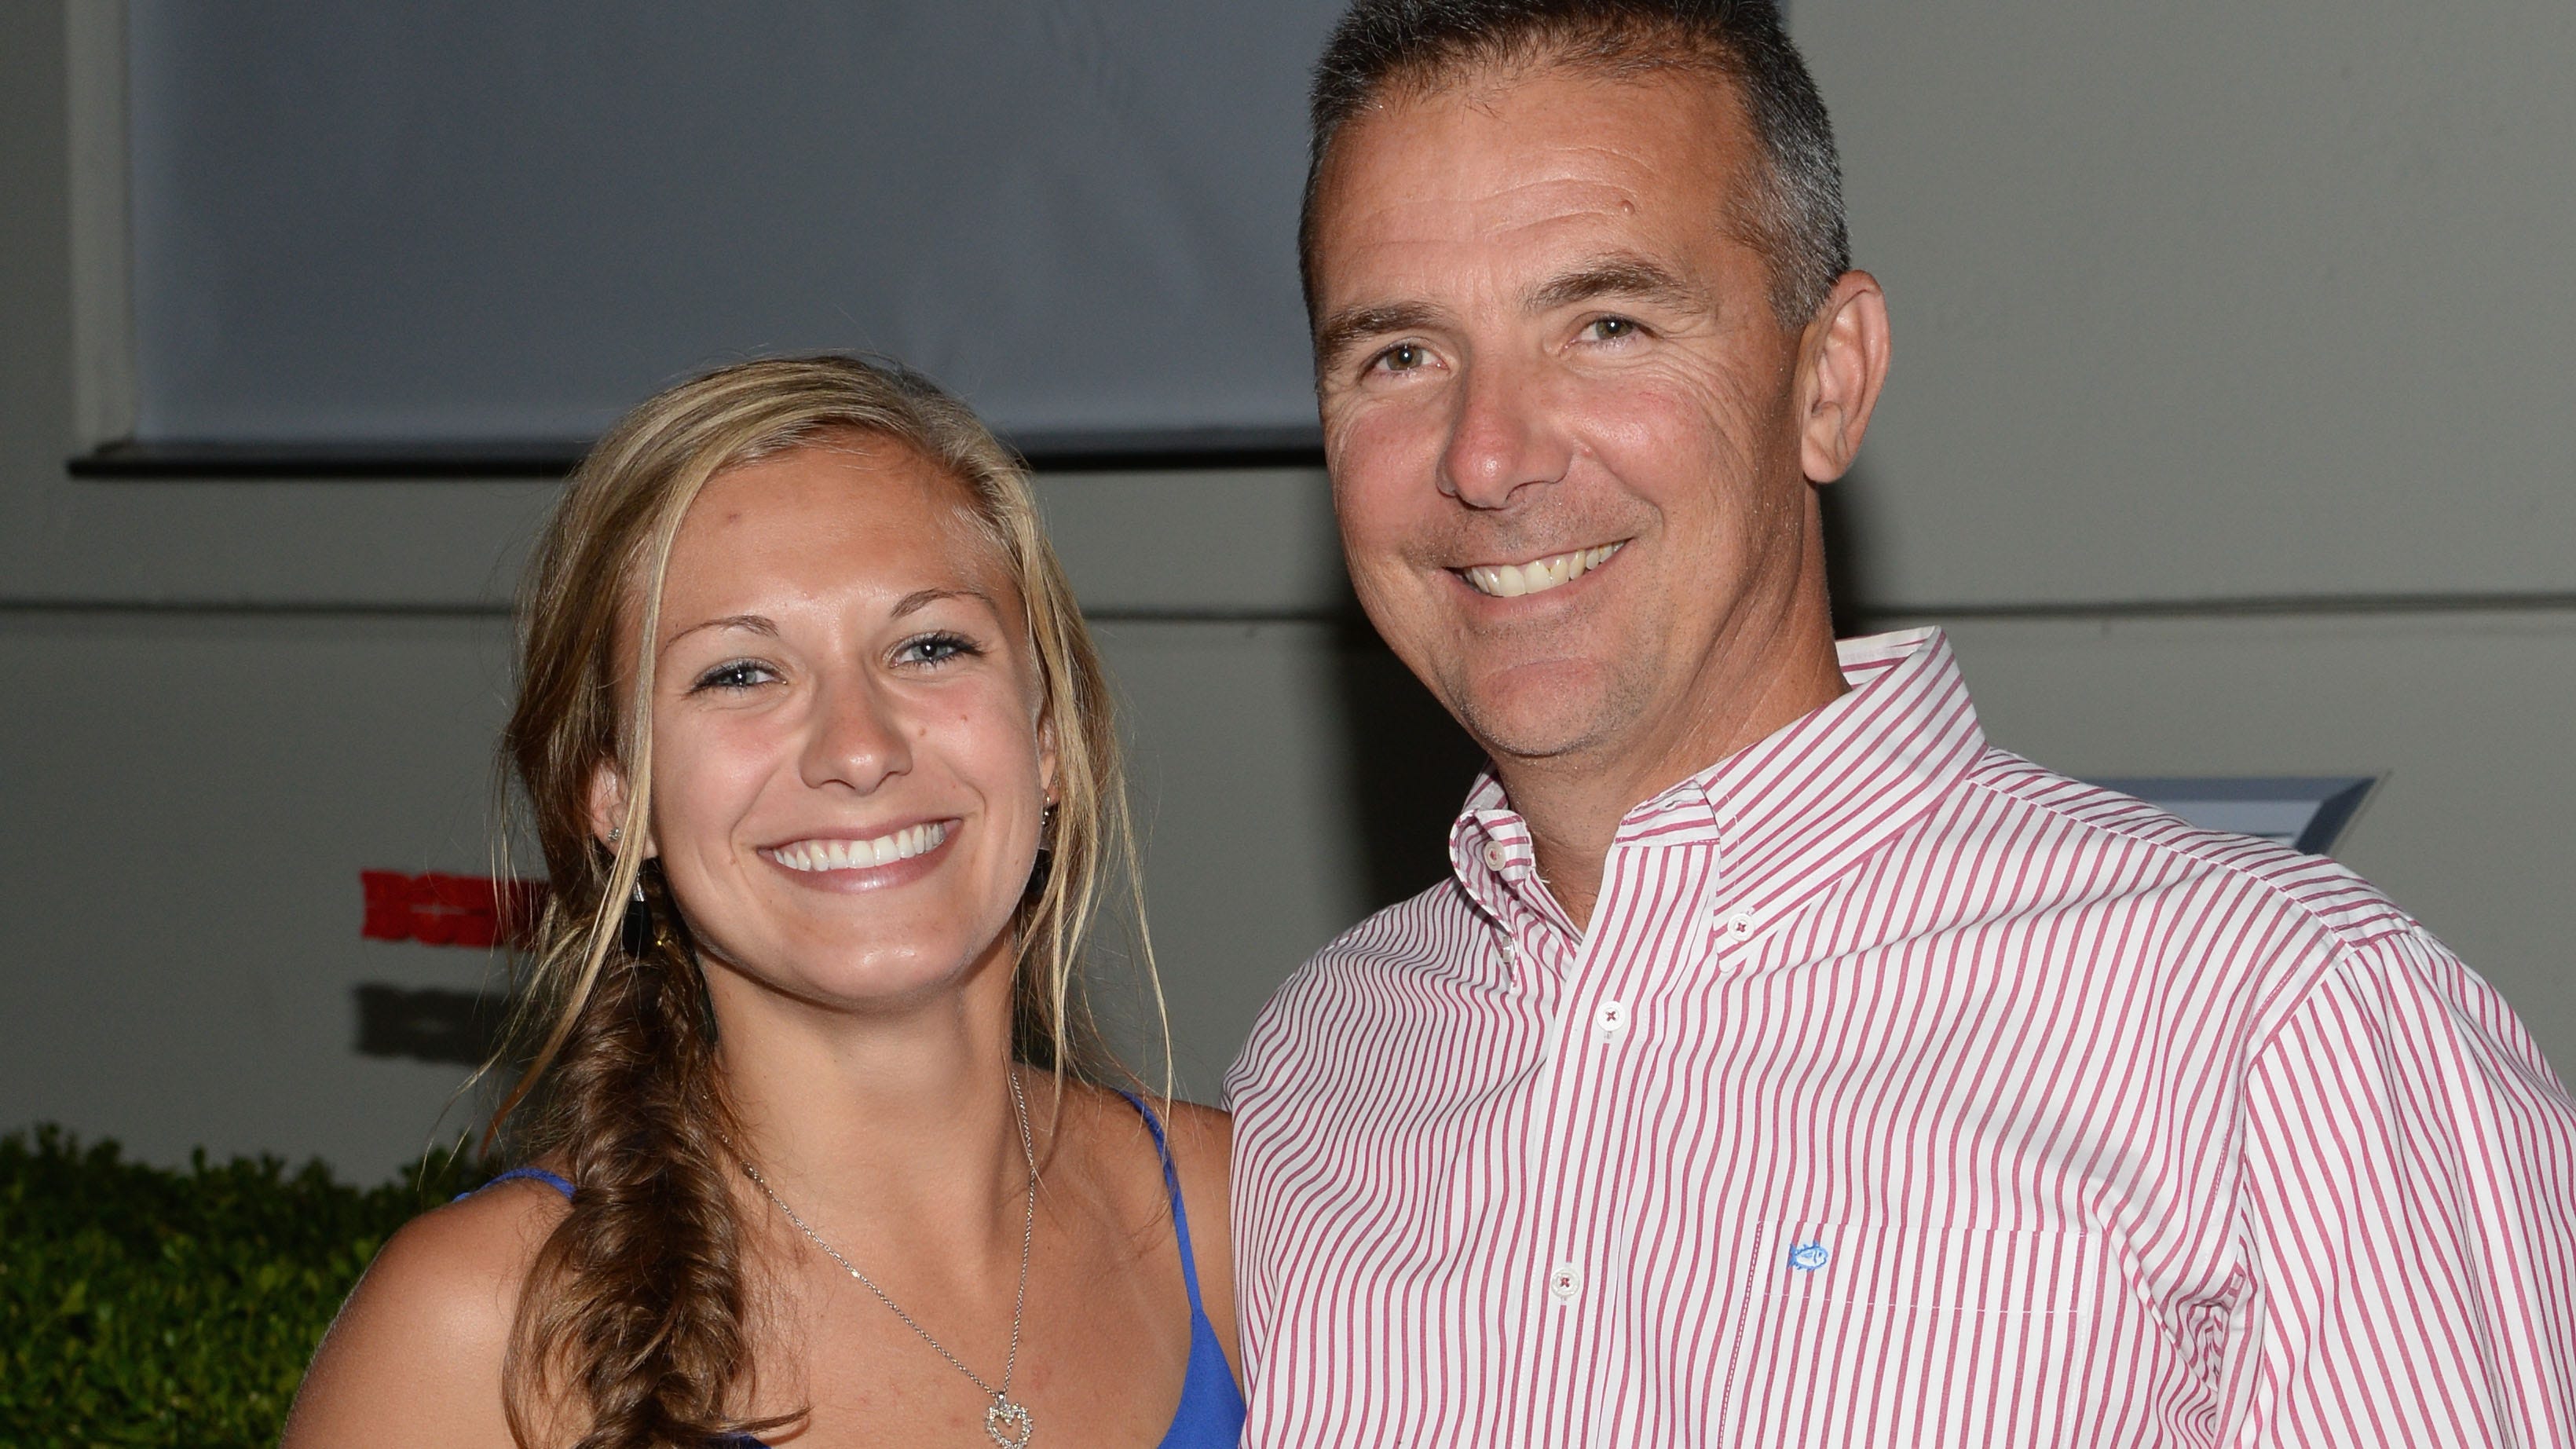 Urban Meyer’s daughter vows ‘war’ after Jaguars fire coach: ‘I think you just released the kraken in me’ – Fox News